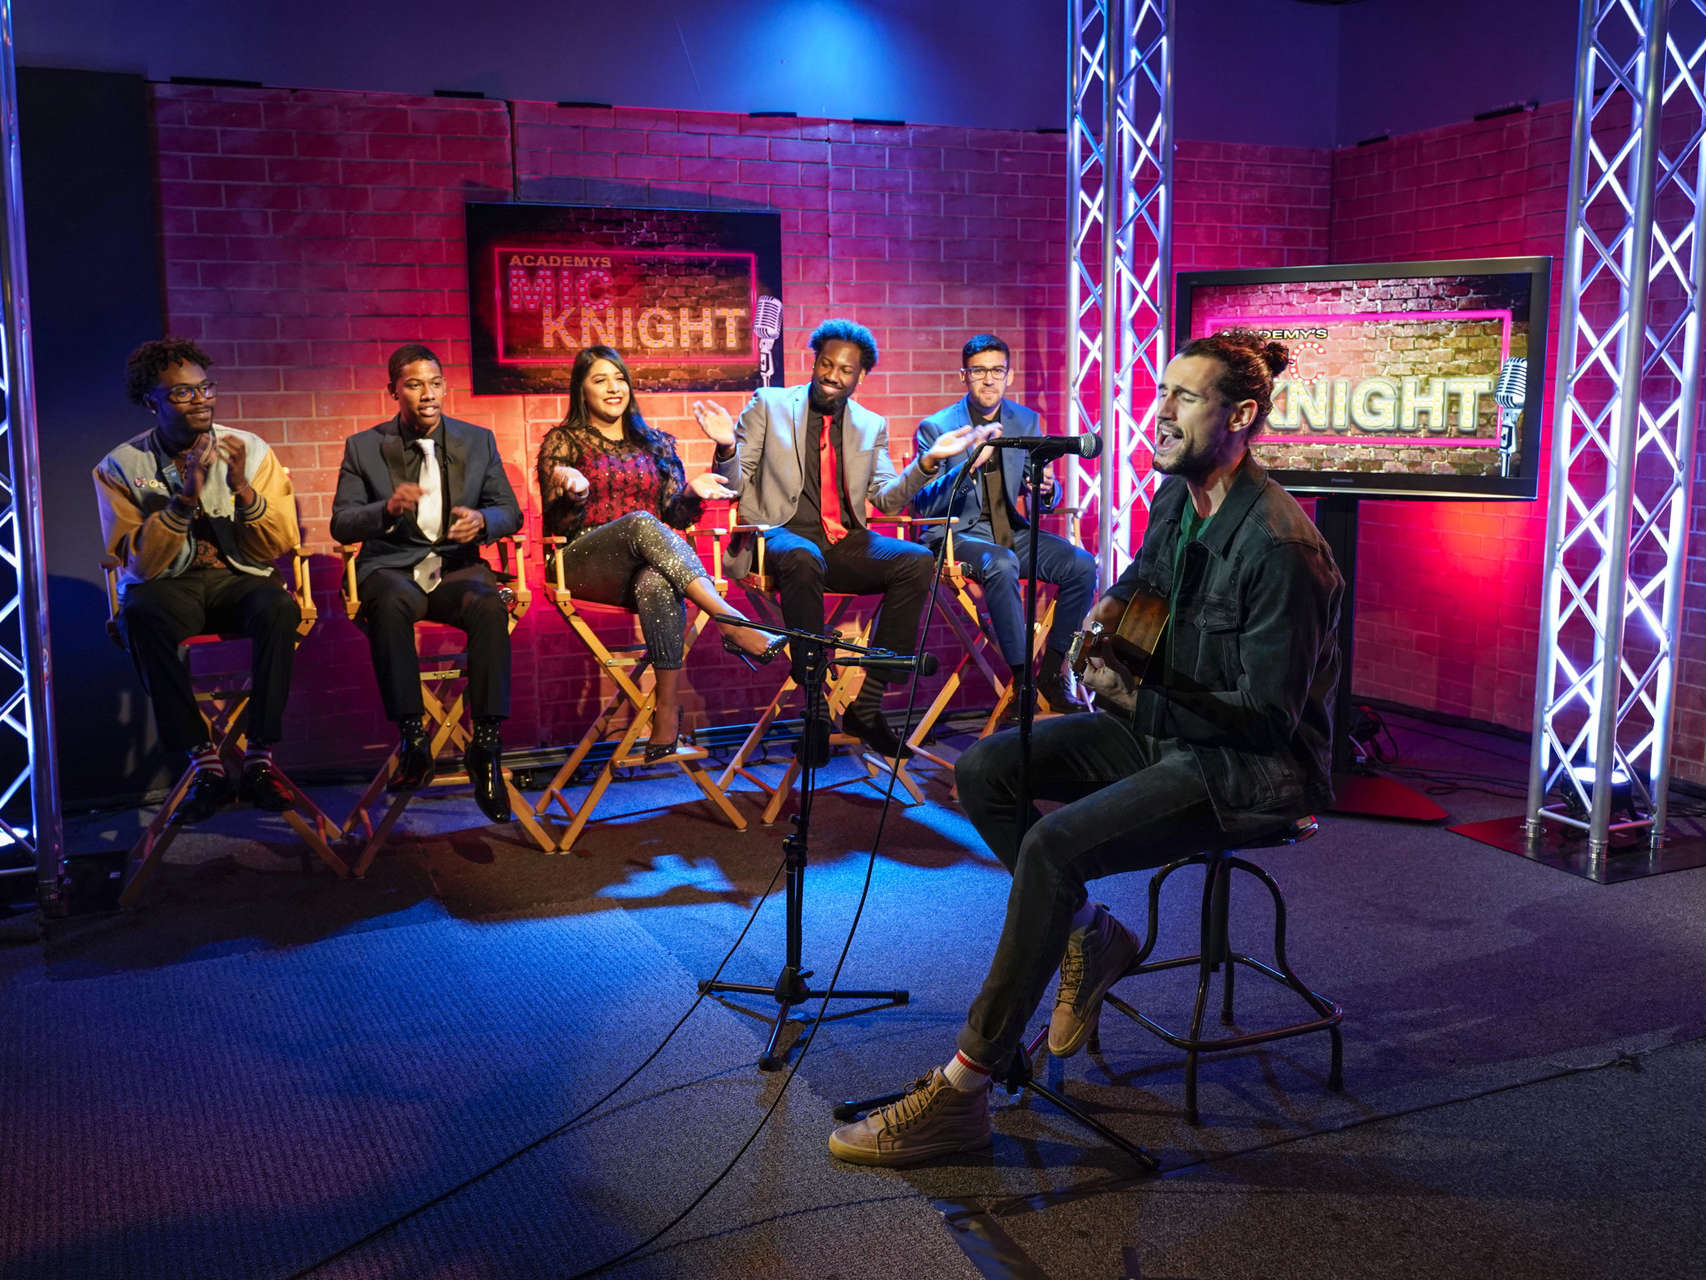 Entertainment Arts - School of Communications students at Mic Knight